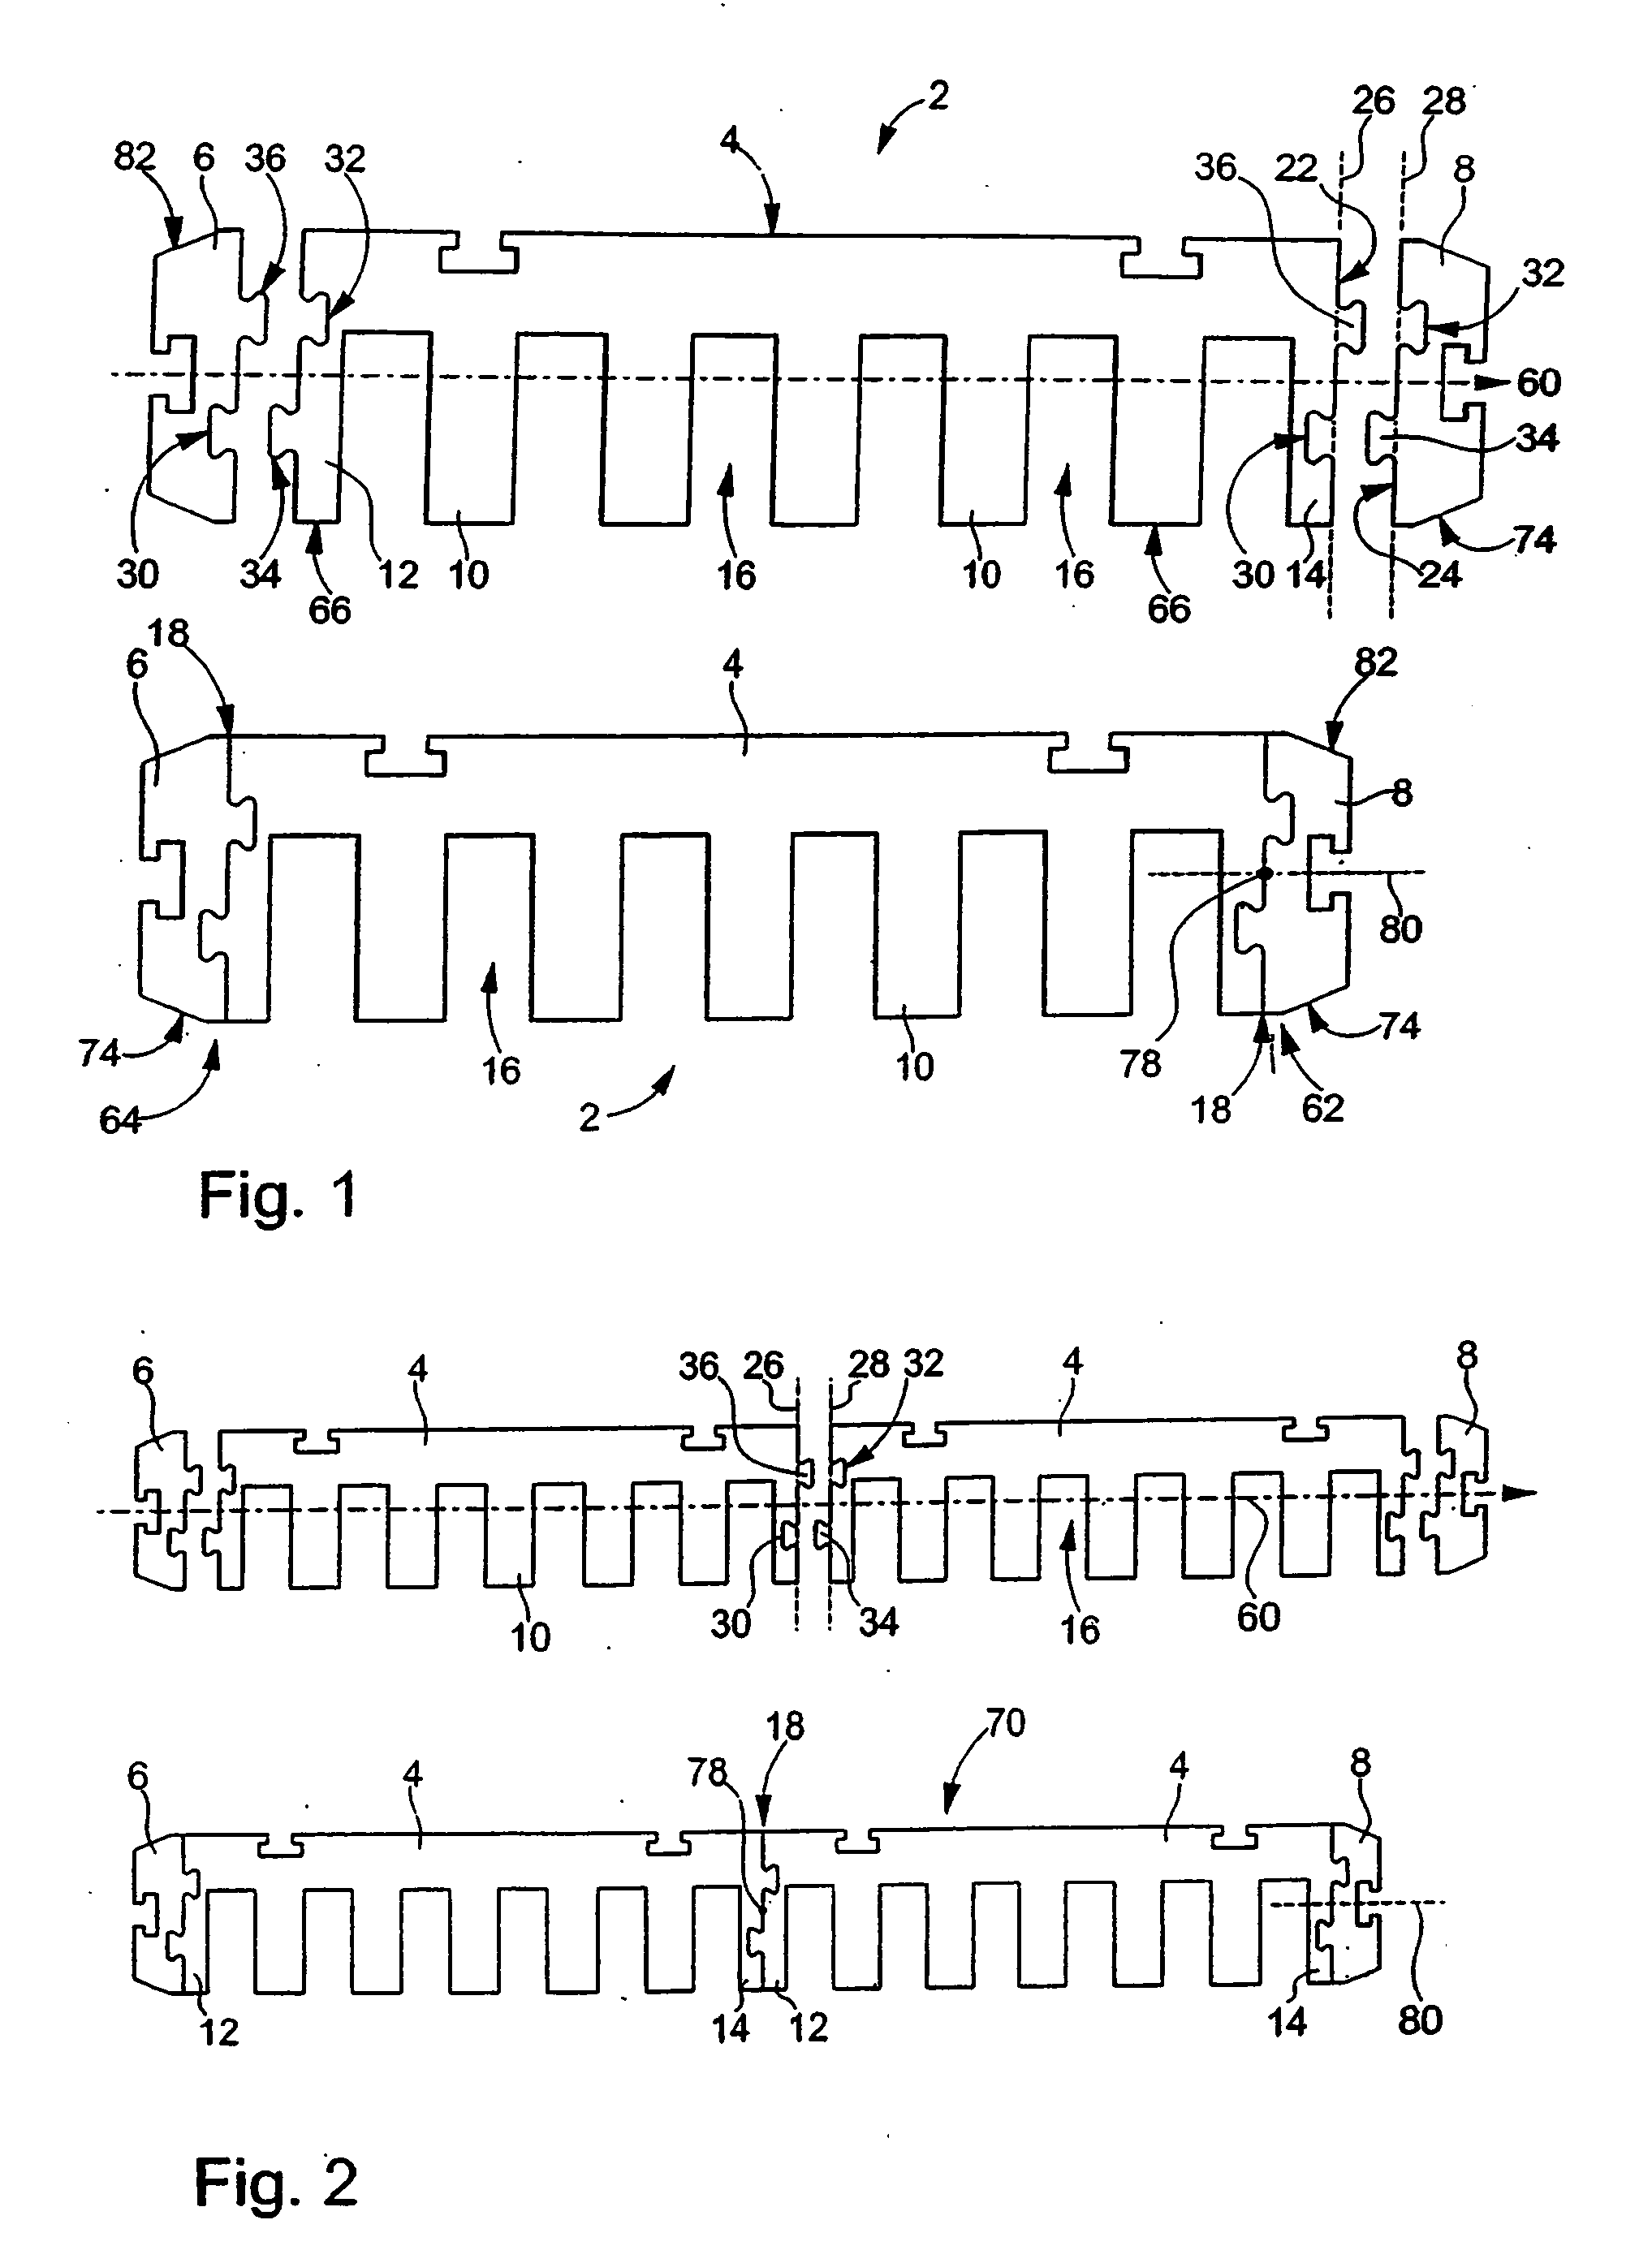 Linear motor with a segmented stator